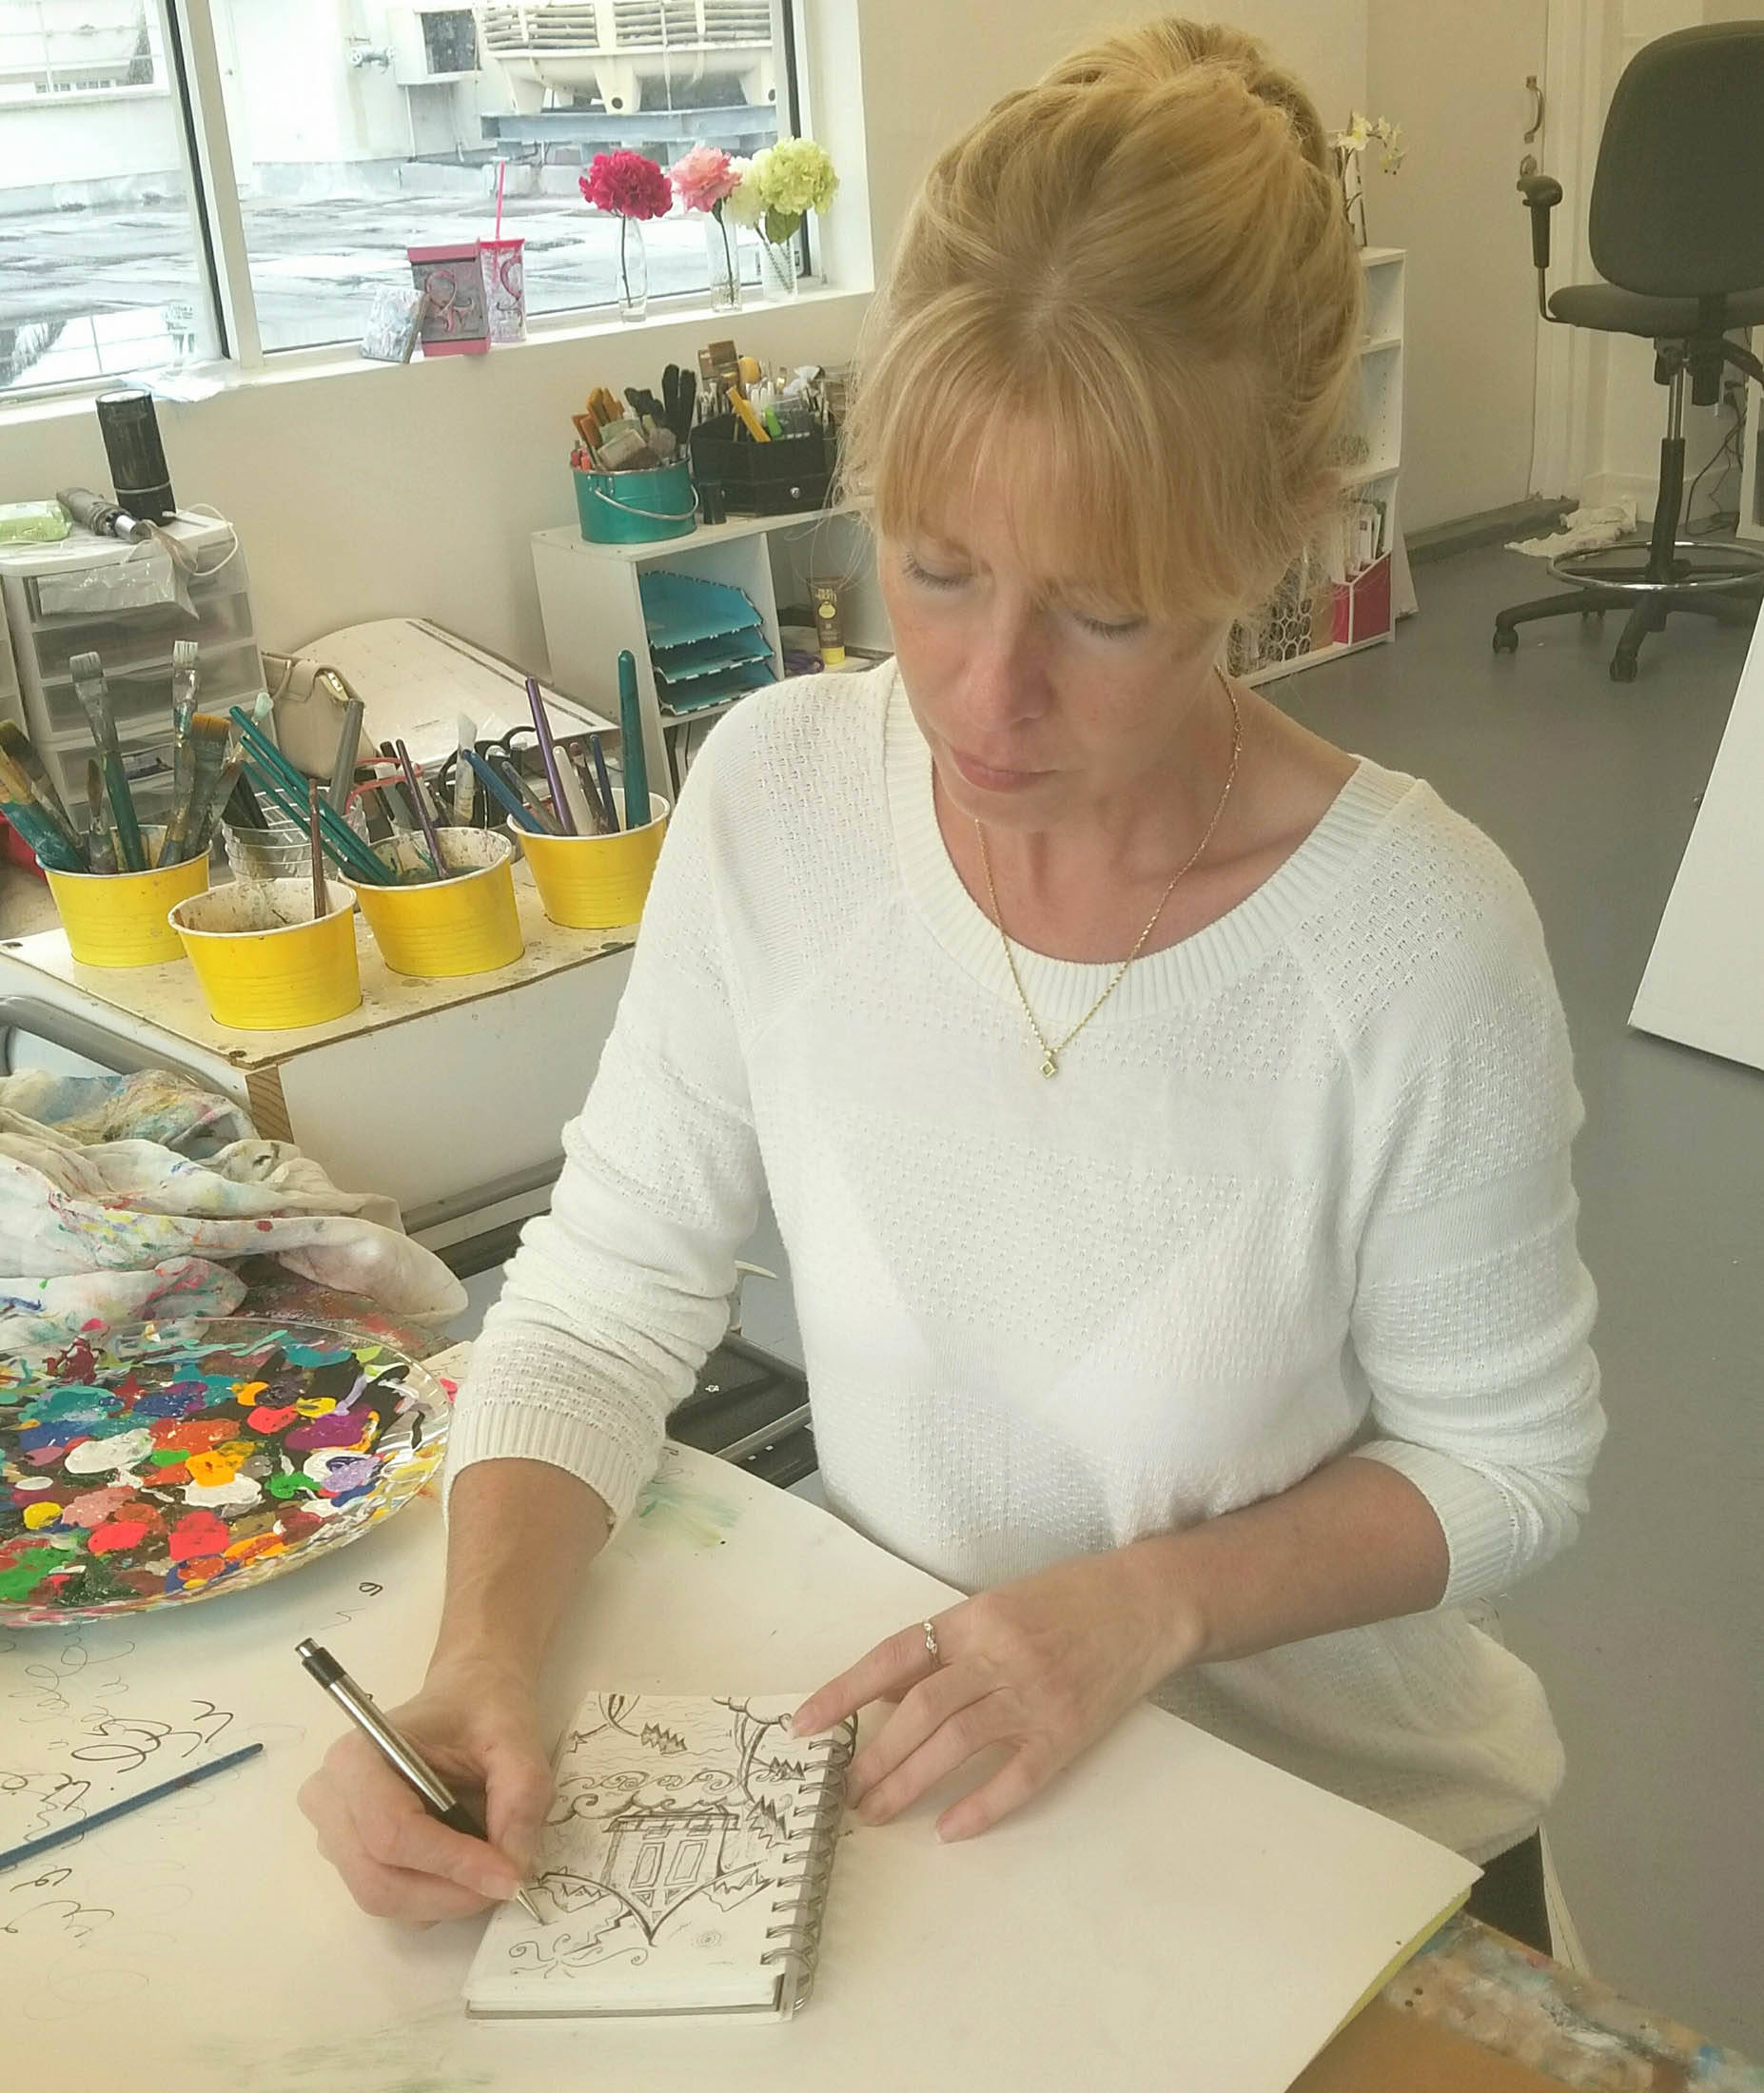 Megan A. Duncanson works on sketches for a new Alaska-themed coloring book in her Miami studio. Photo by Tara Neilson